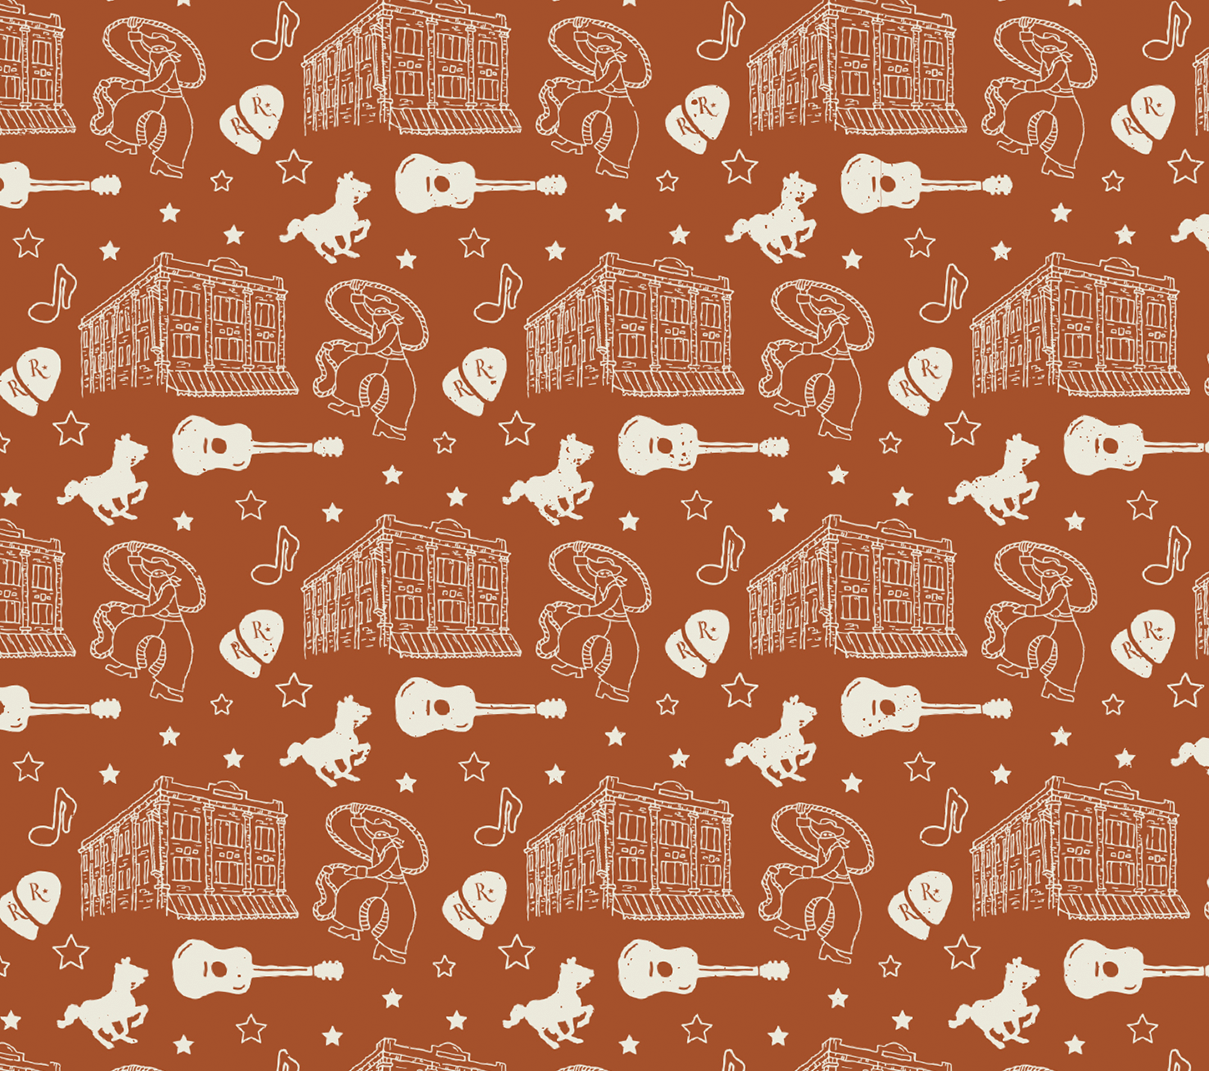 A pattern is created using the brand illustrations of the cowboy and building, along with guitars, guitar picks, horses, and stars